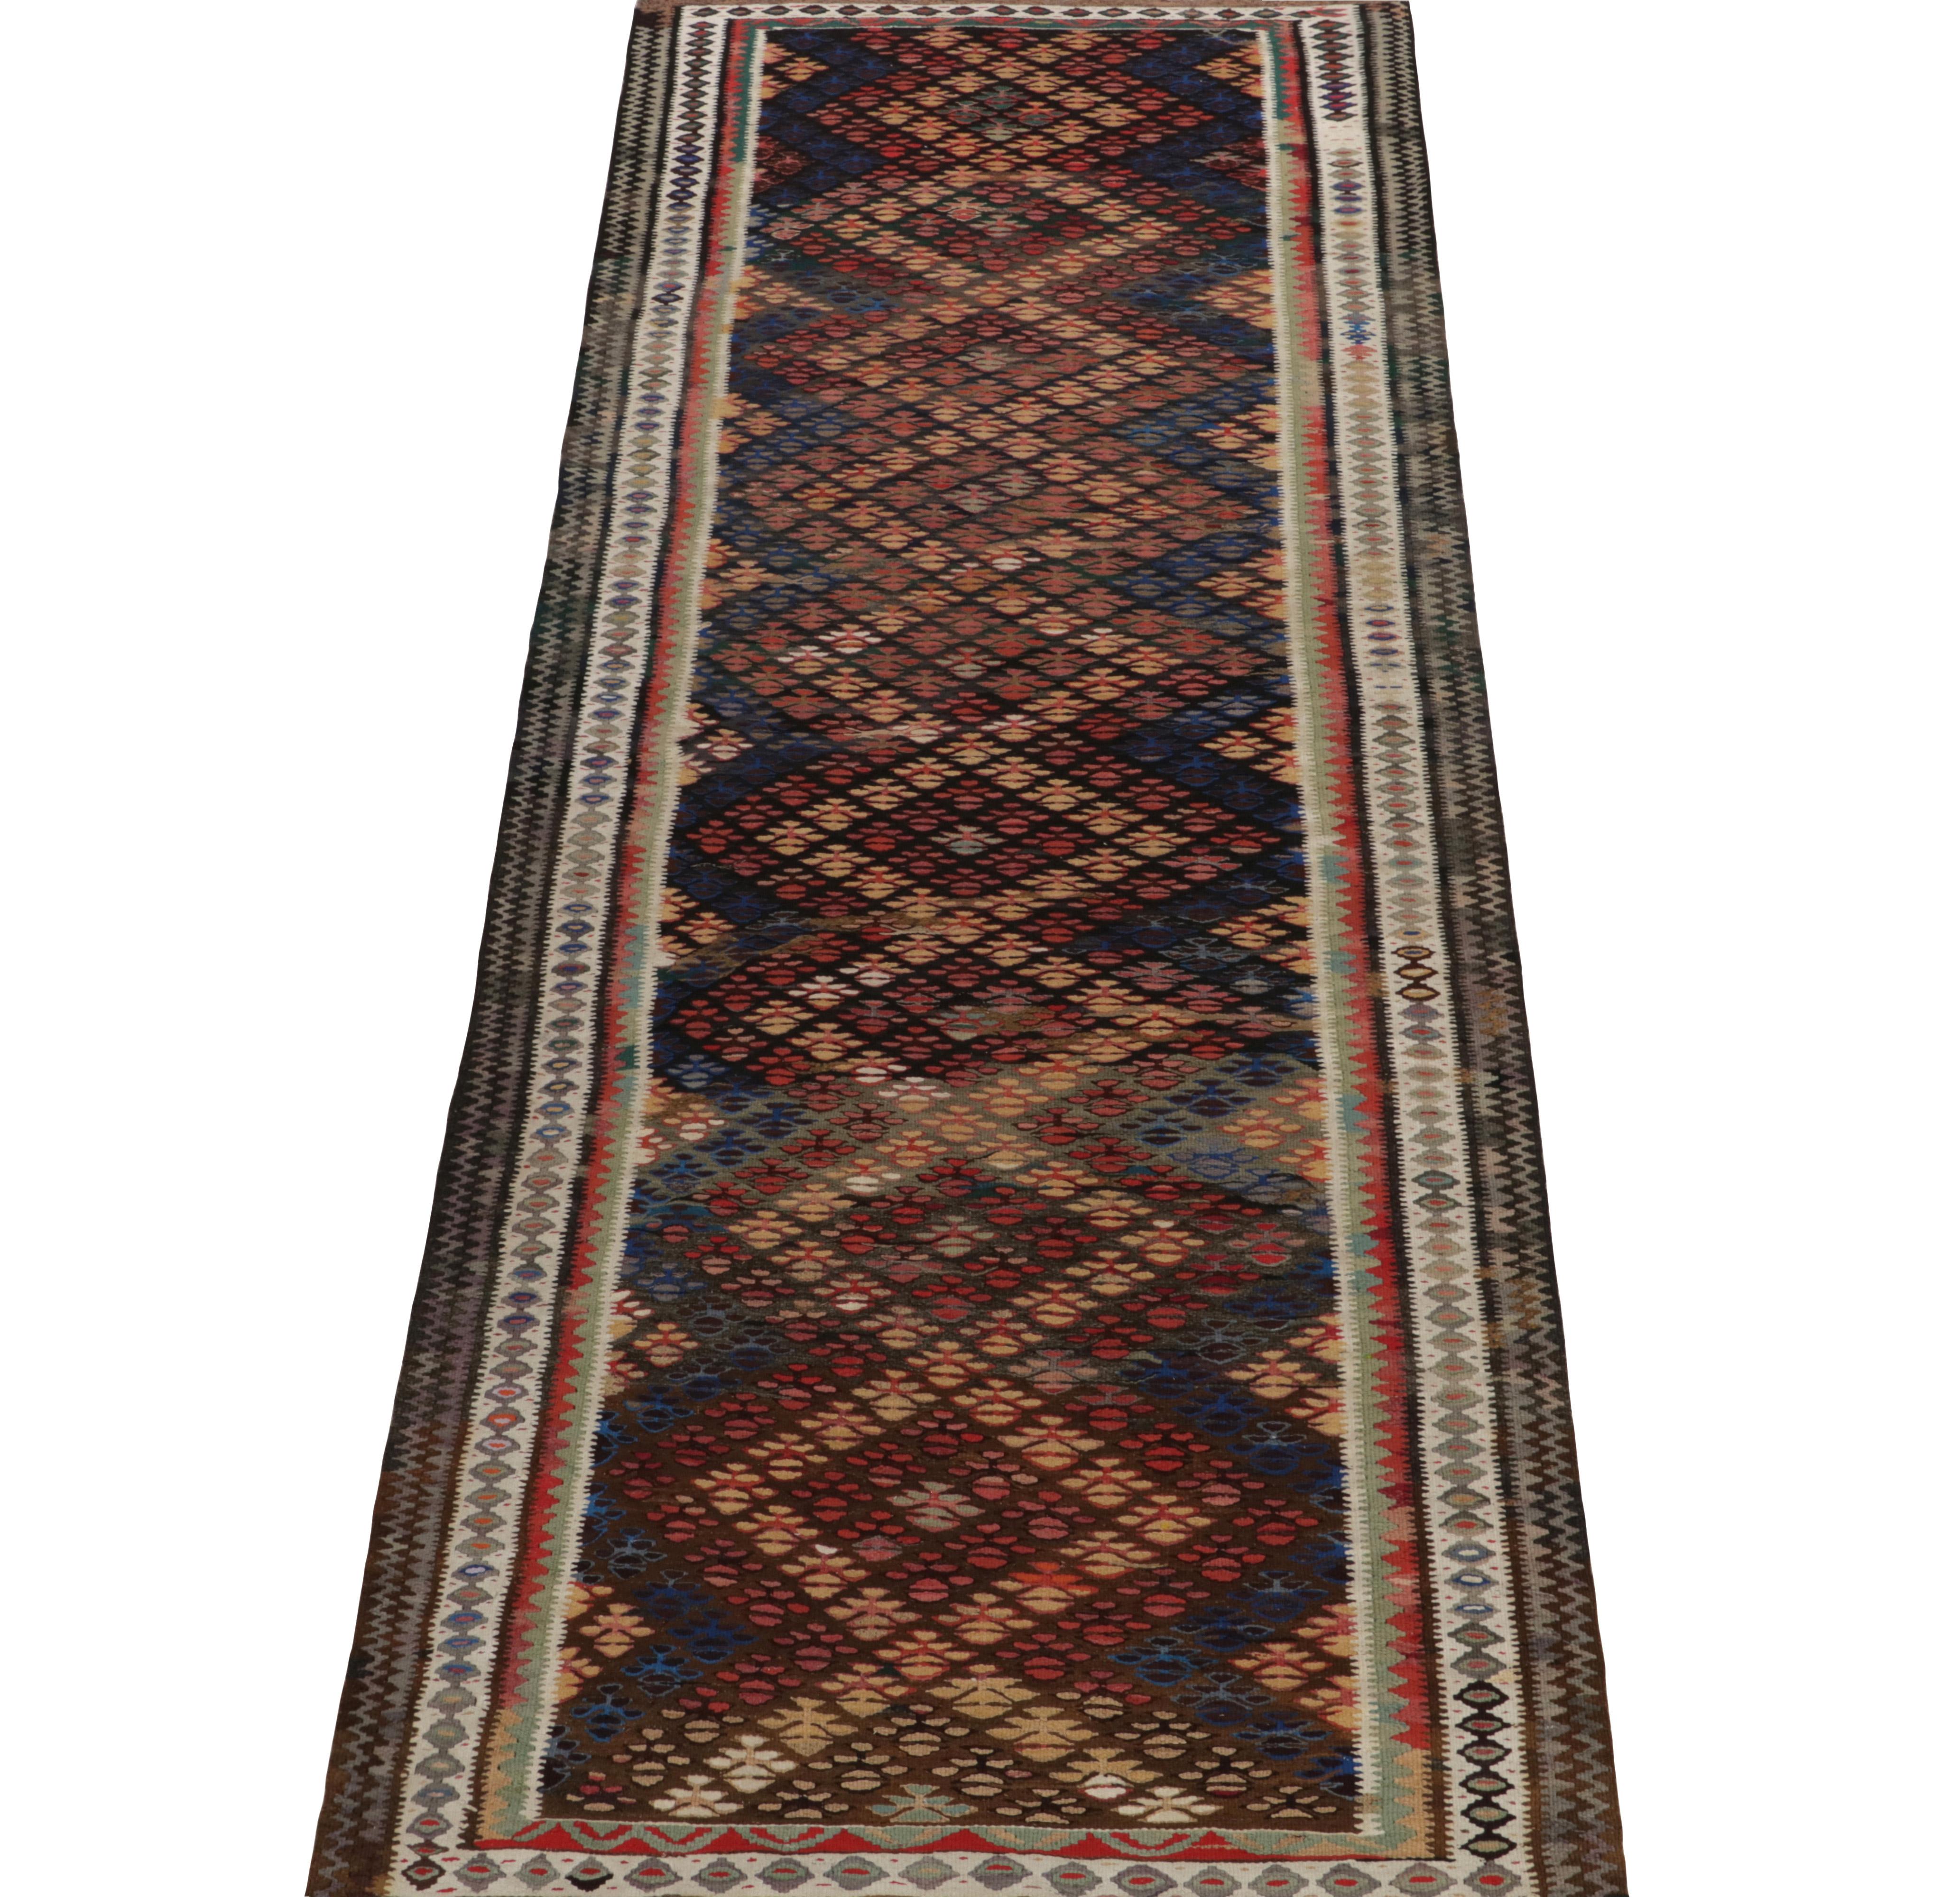 Handwoven in Fine wool, a 3x9 vintage Kilim runner from Turkey, now joining our coveted tribal collection. Carrying a subtly more dense weave for its era, the 1950s piece reflects mosaic-like pagination of geometry in tones of blue, red, gold, gray